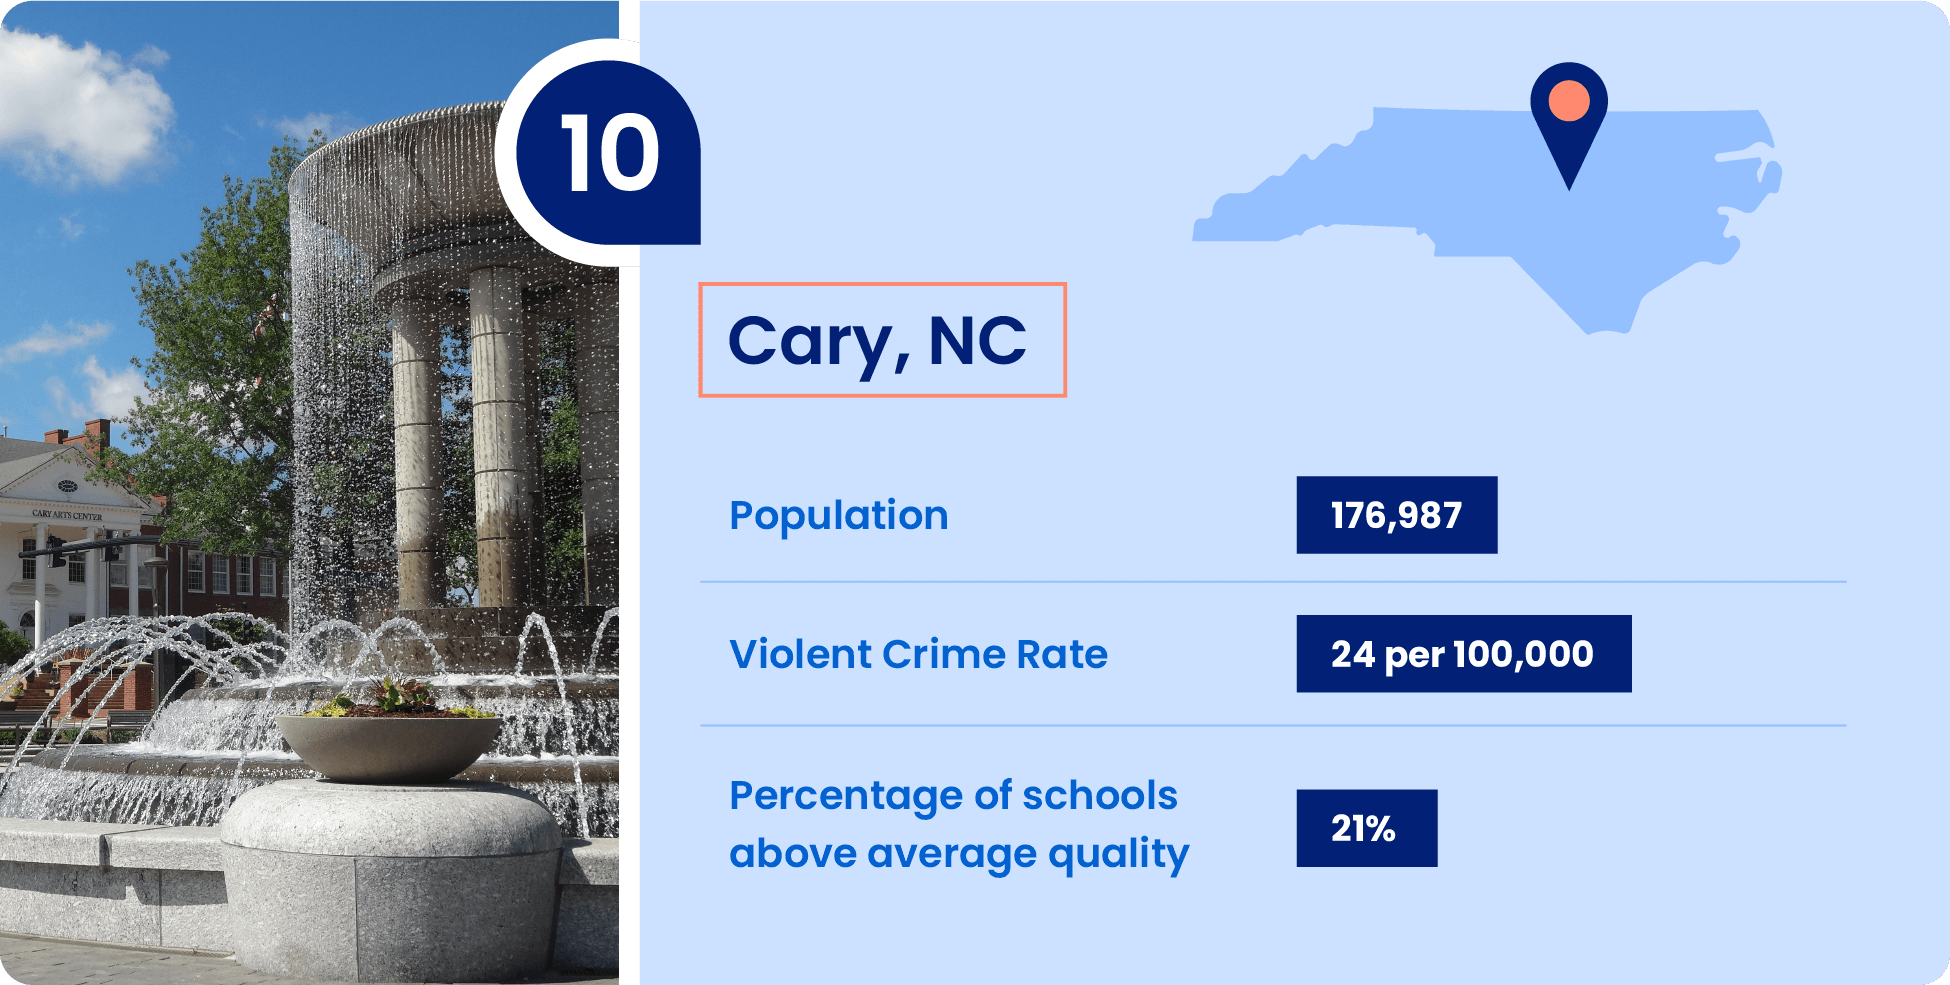 Image shows key information that make Cary, North Carolina a great place to raise a family.